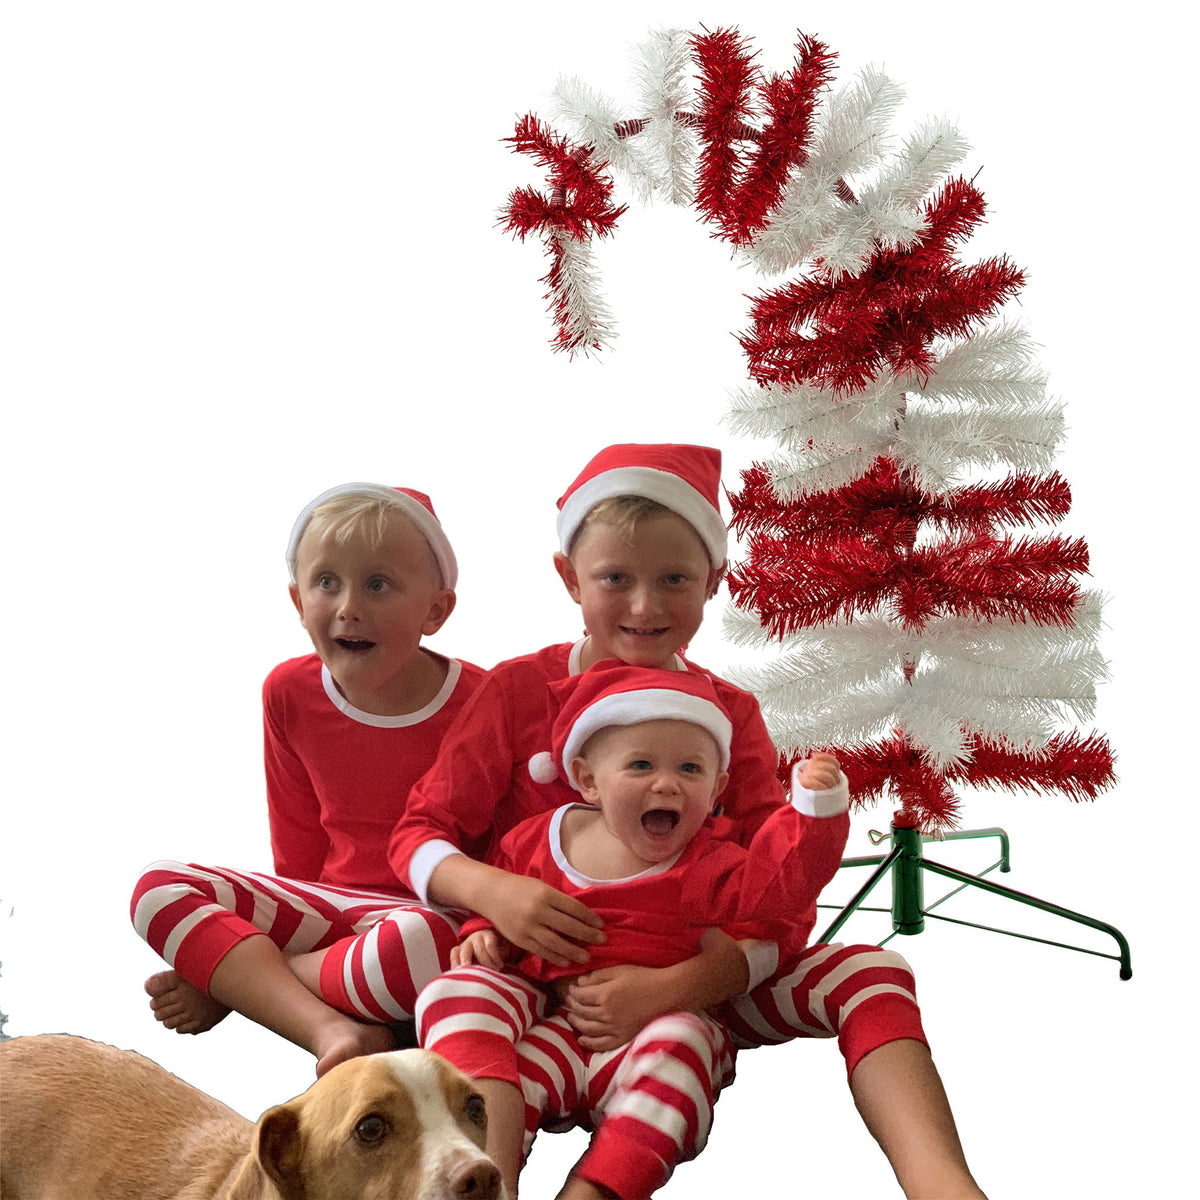 Dr. Seuss Red & White Tinsel Christmas Tree